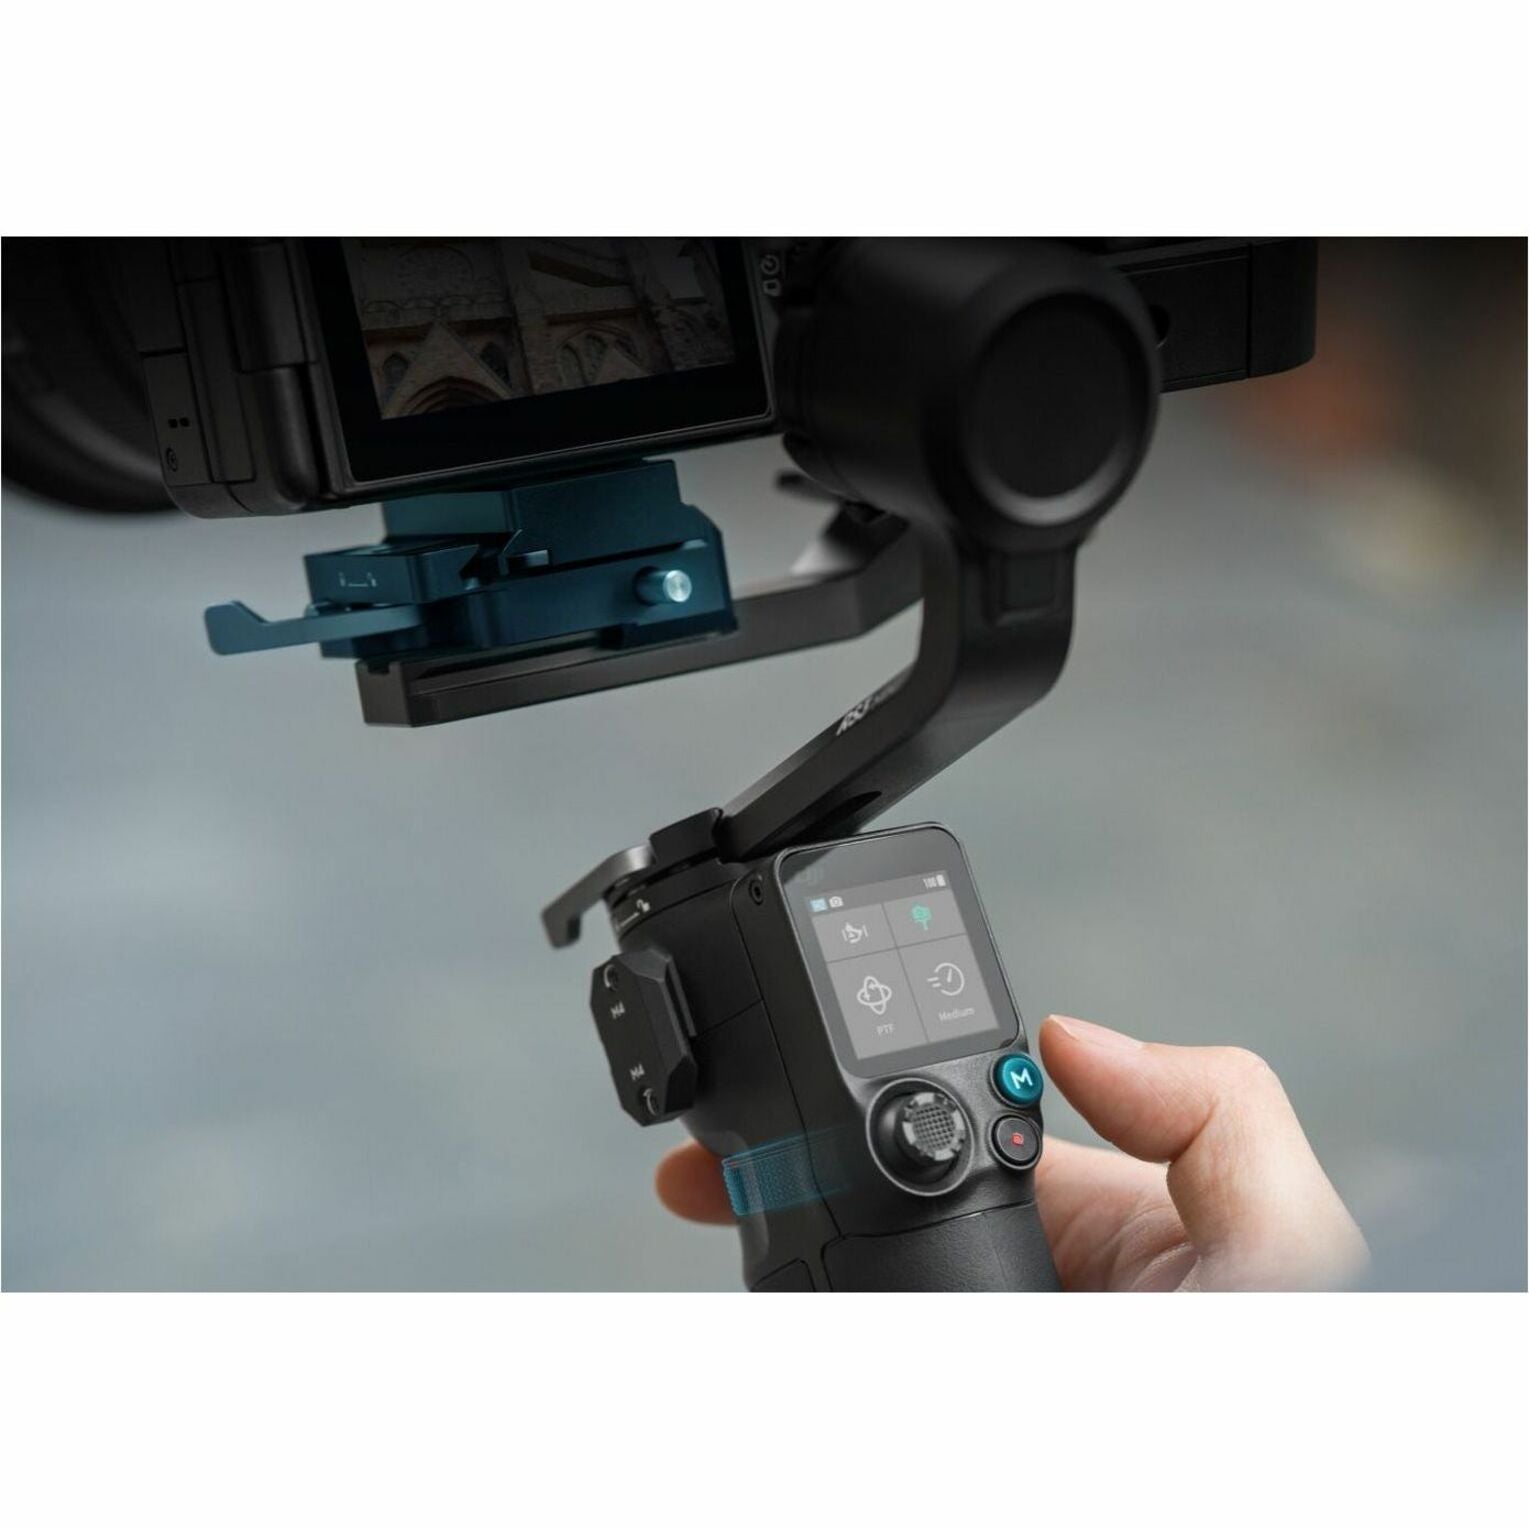 DJI CP.RN.00000294.01 RS 3 Mini Gimbal Stabilizer, Lightweight and Versatile Camera Stabilizer for Smooth Video Footage